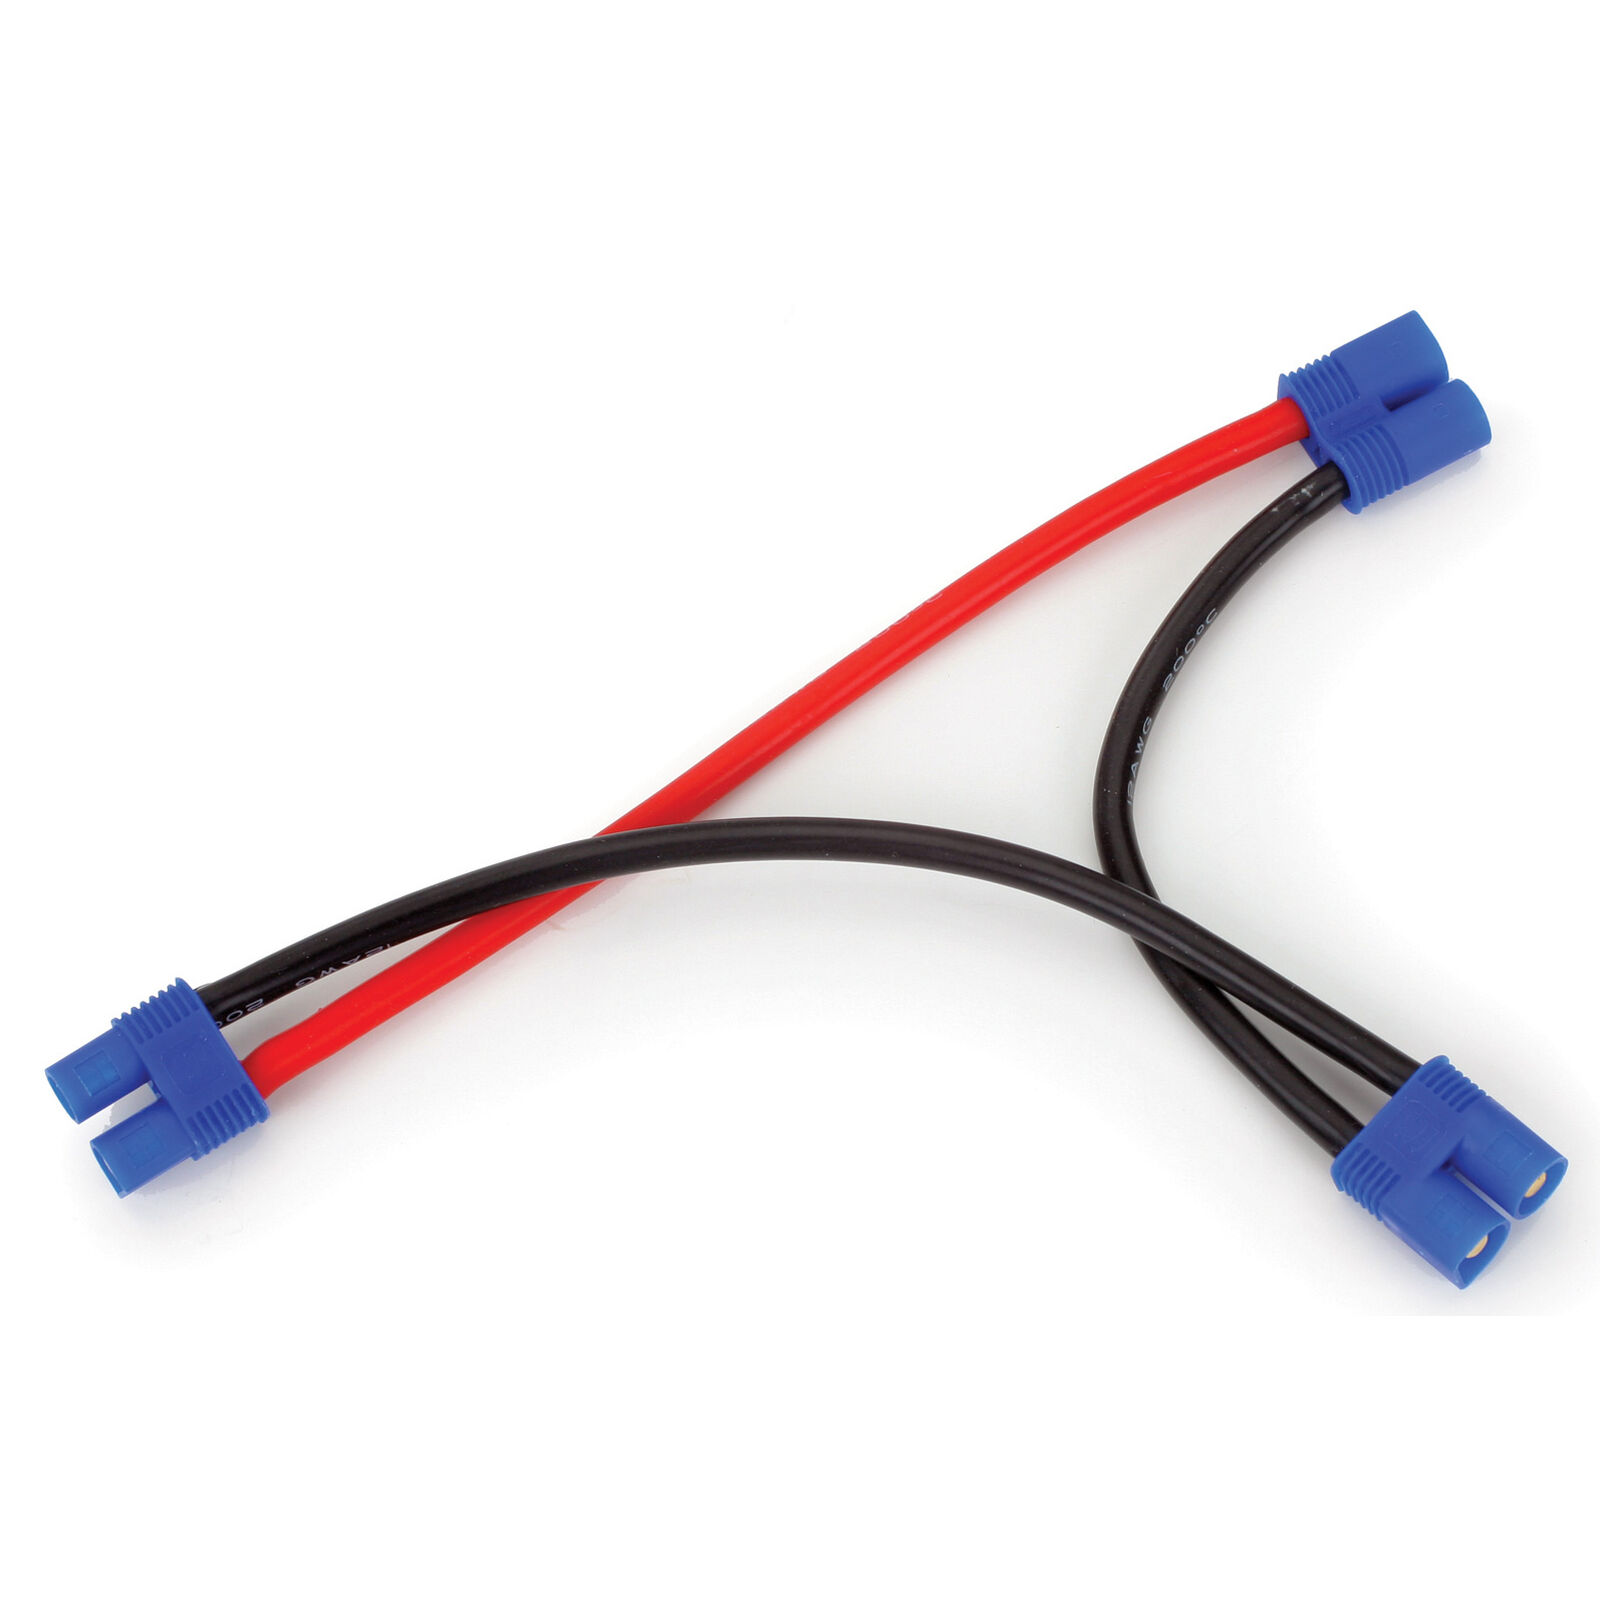 Series Harness: EC3 Battery, 13 AWG